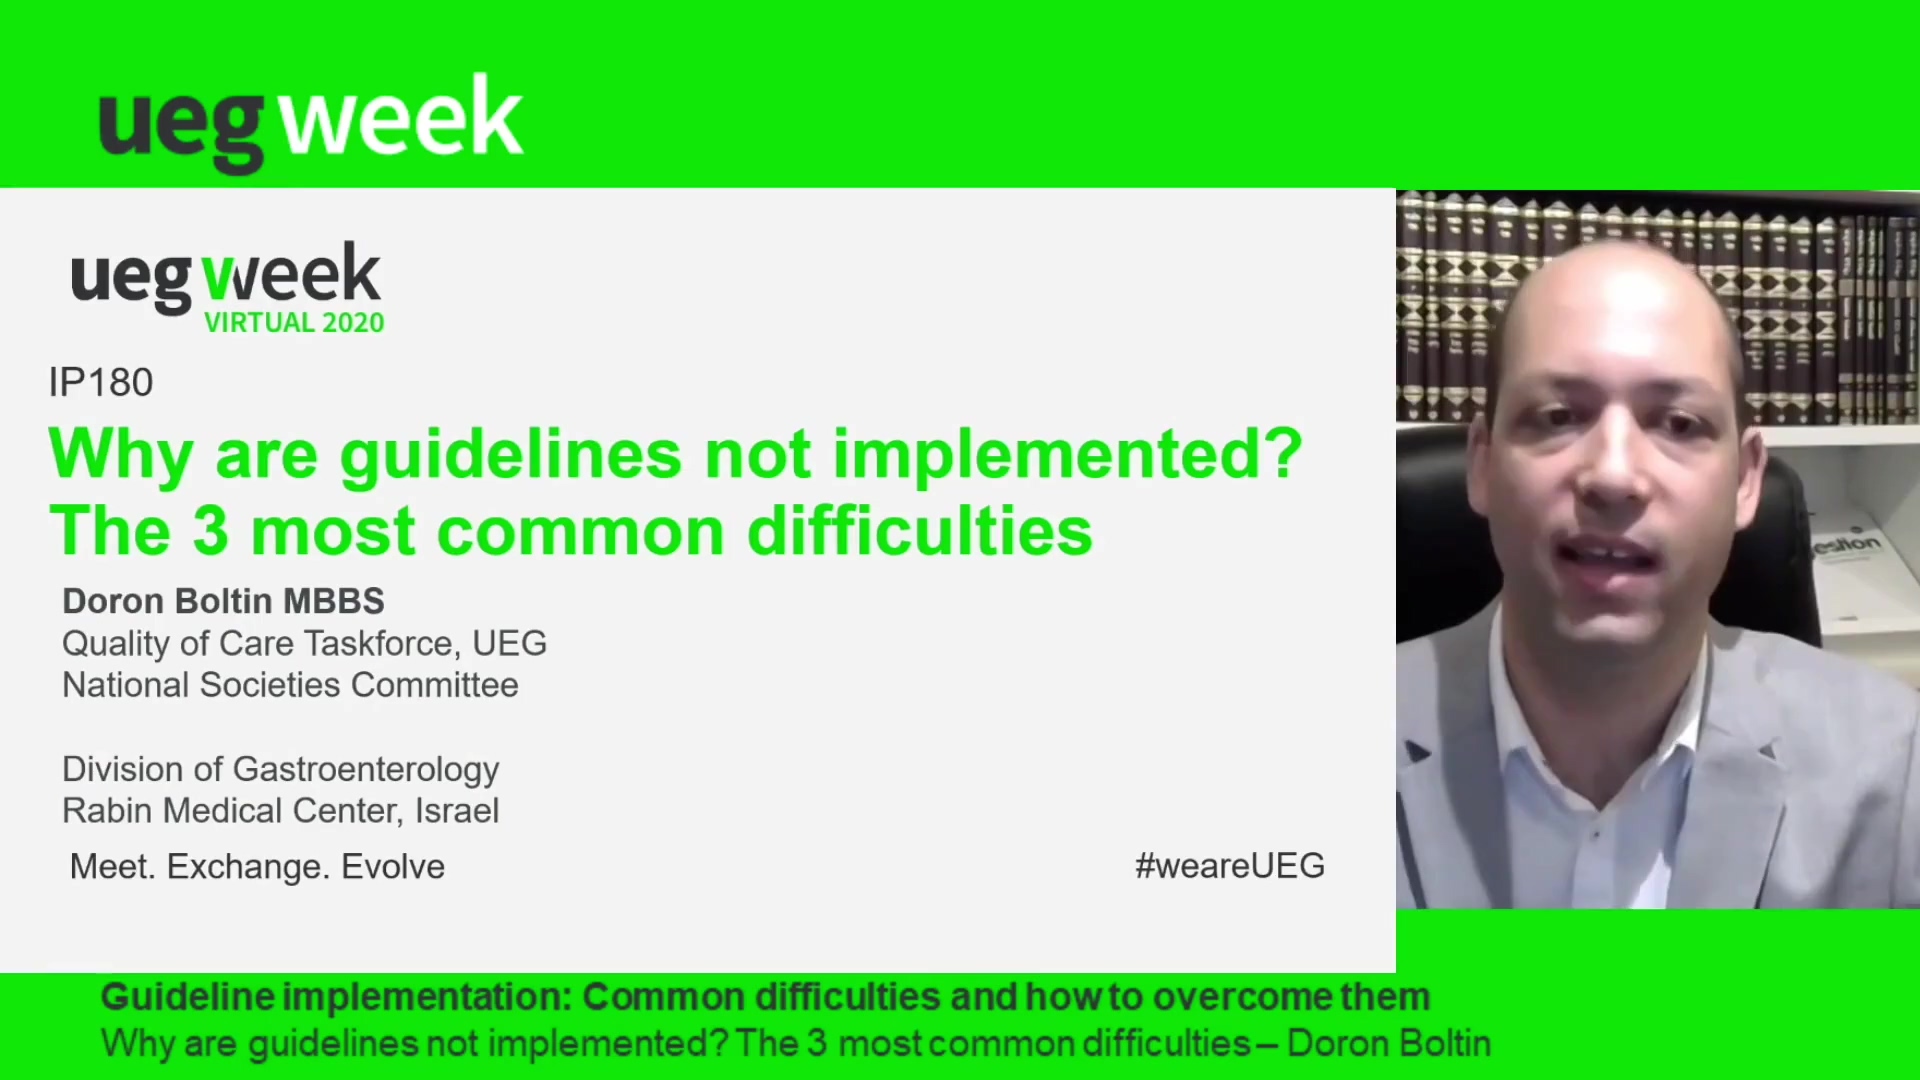 Guideline implementation: Common difficulties and how to overcome them